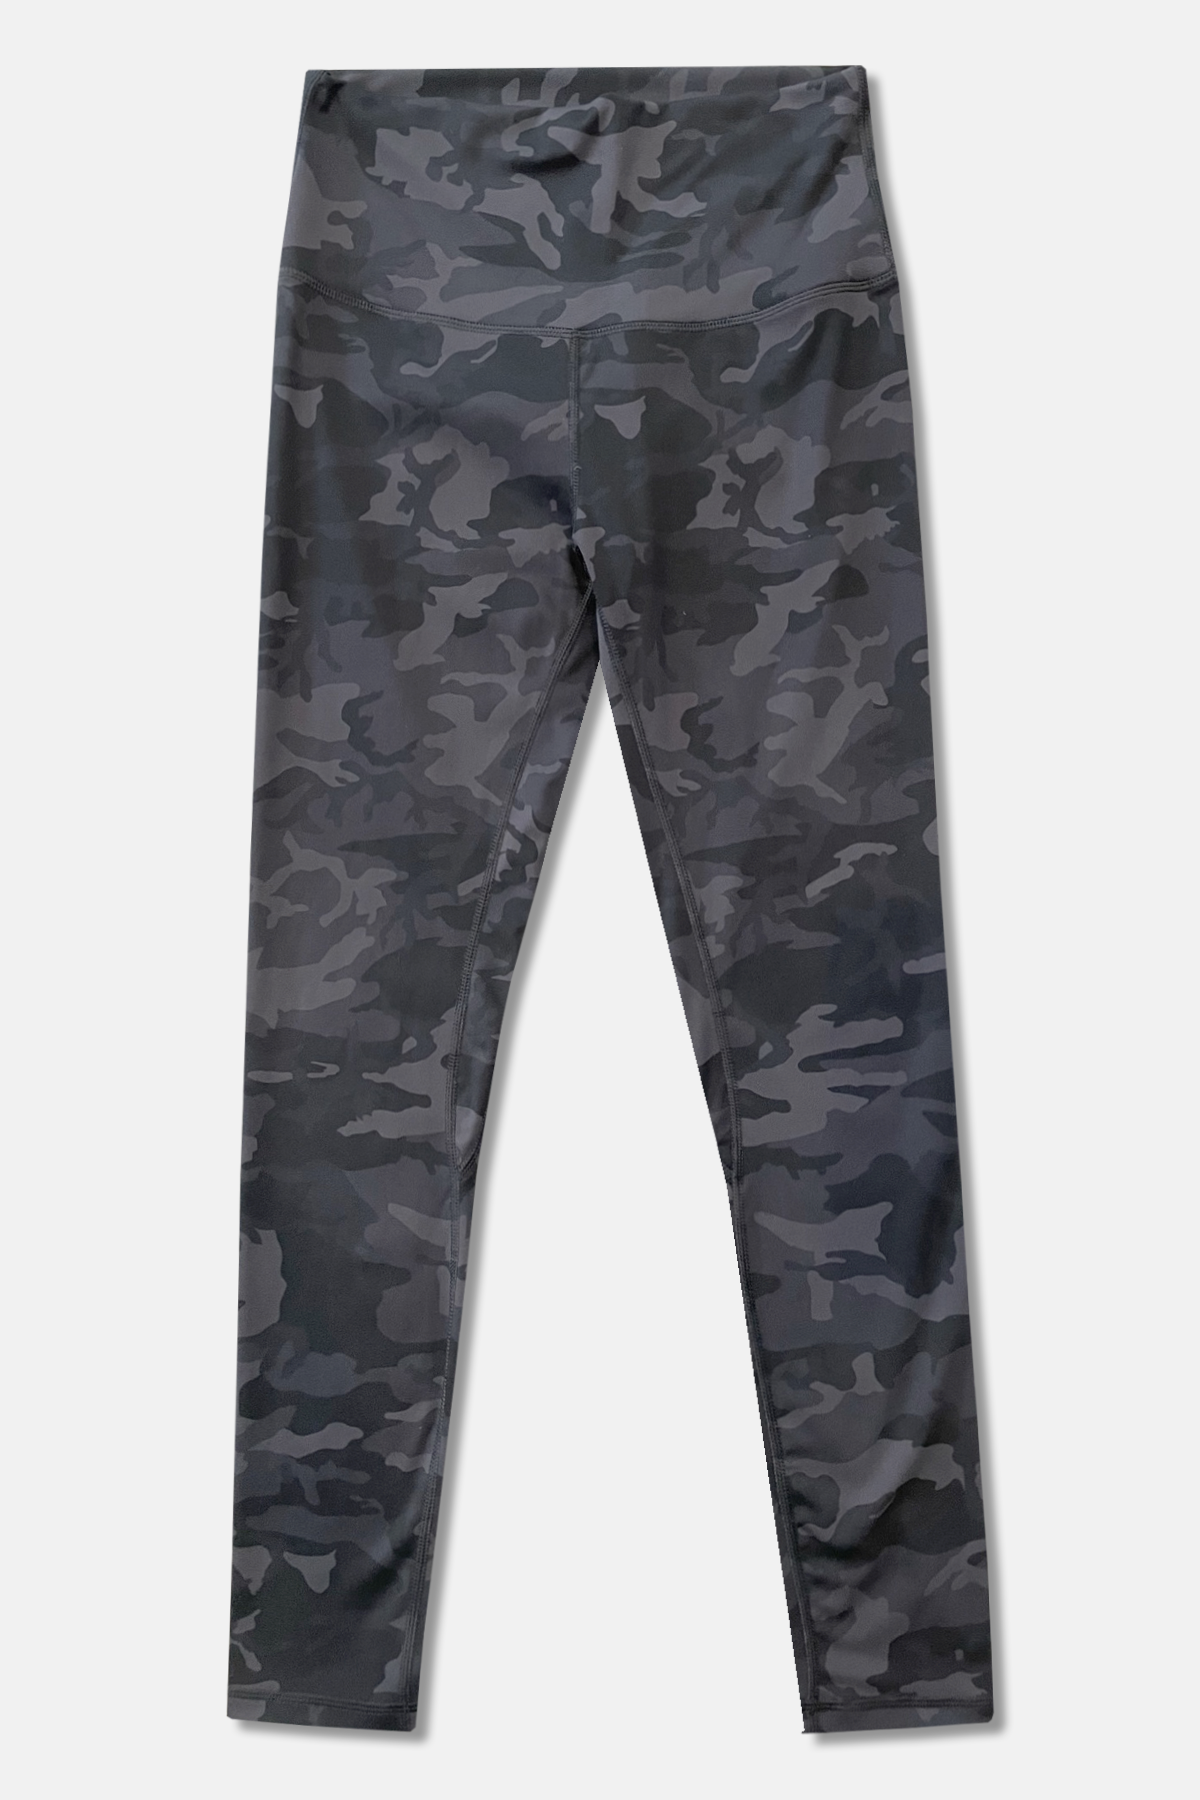 The Best Camo Leggings You Can Buy on